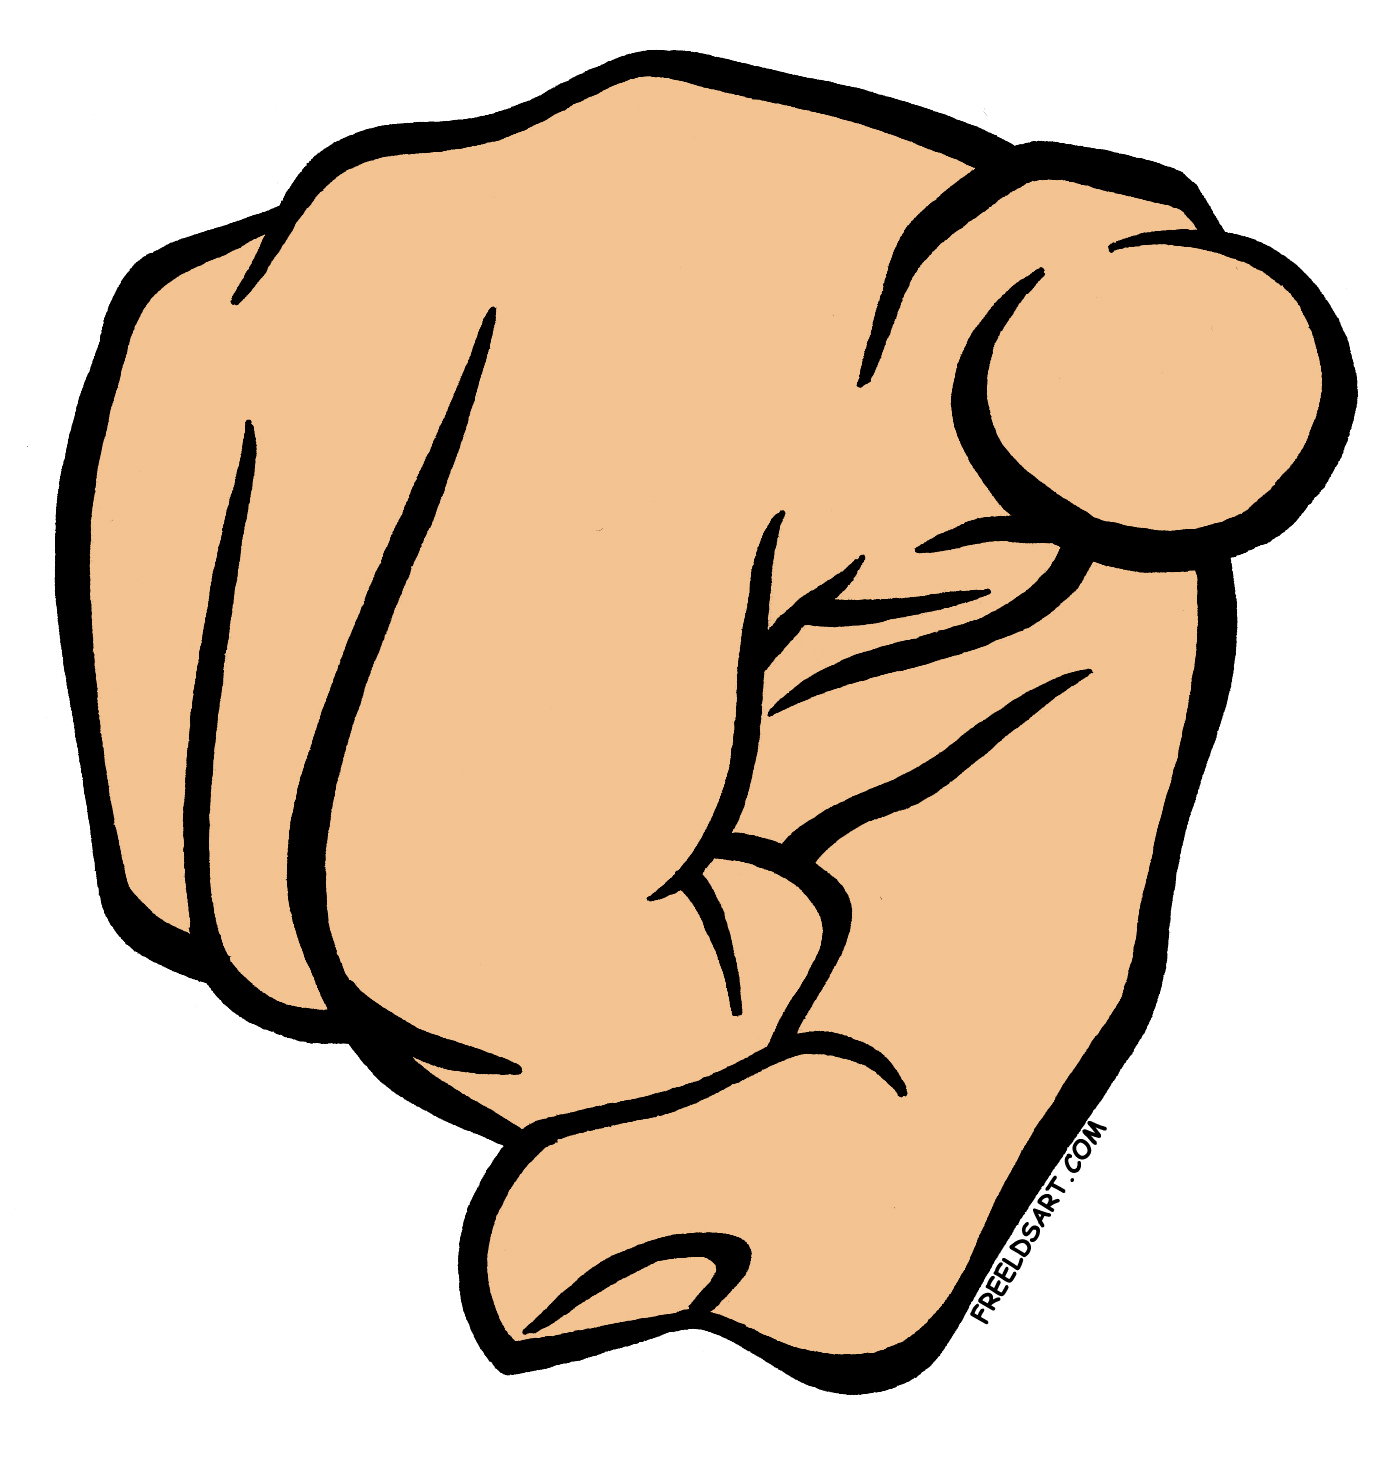 Me Pointing Finger Clipart #1 - Finger Pointing At You, Transparent background PNG HD thumbnail